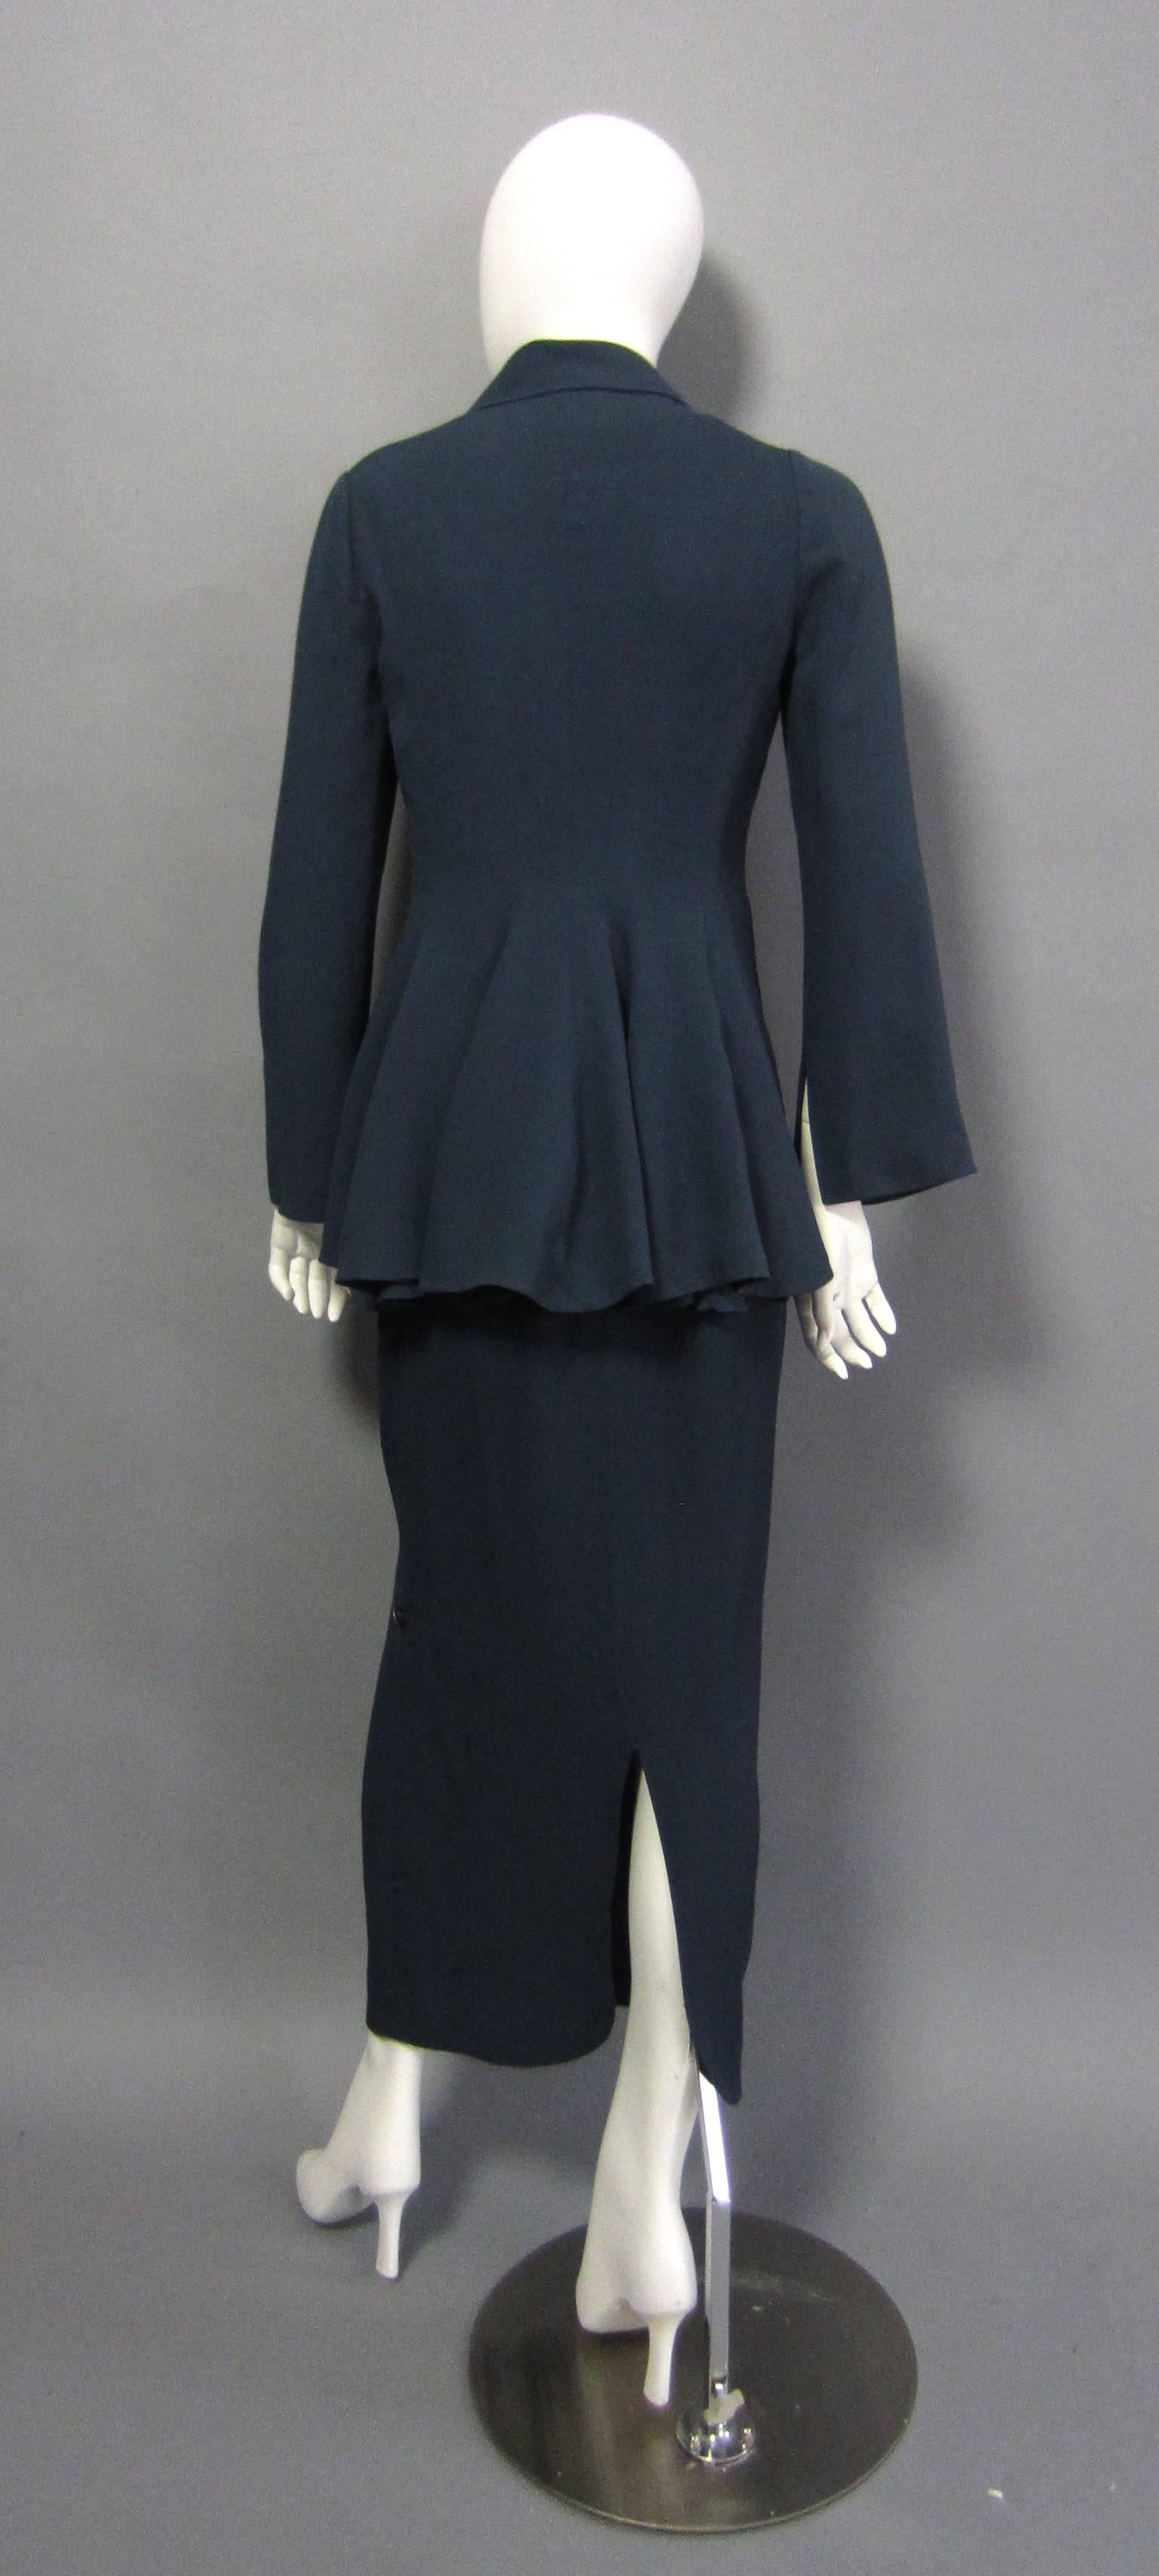 Black CHLOE 3 piece Ensemble with Jacket, Top & Skirt with Button Detail For Sale